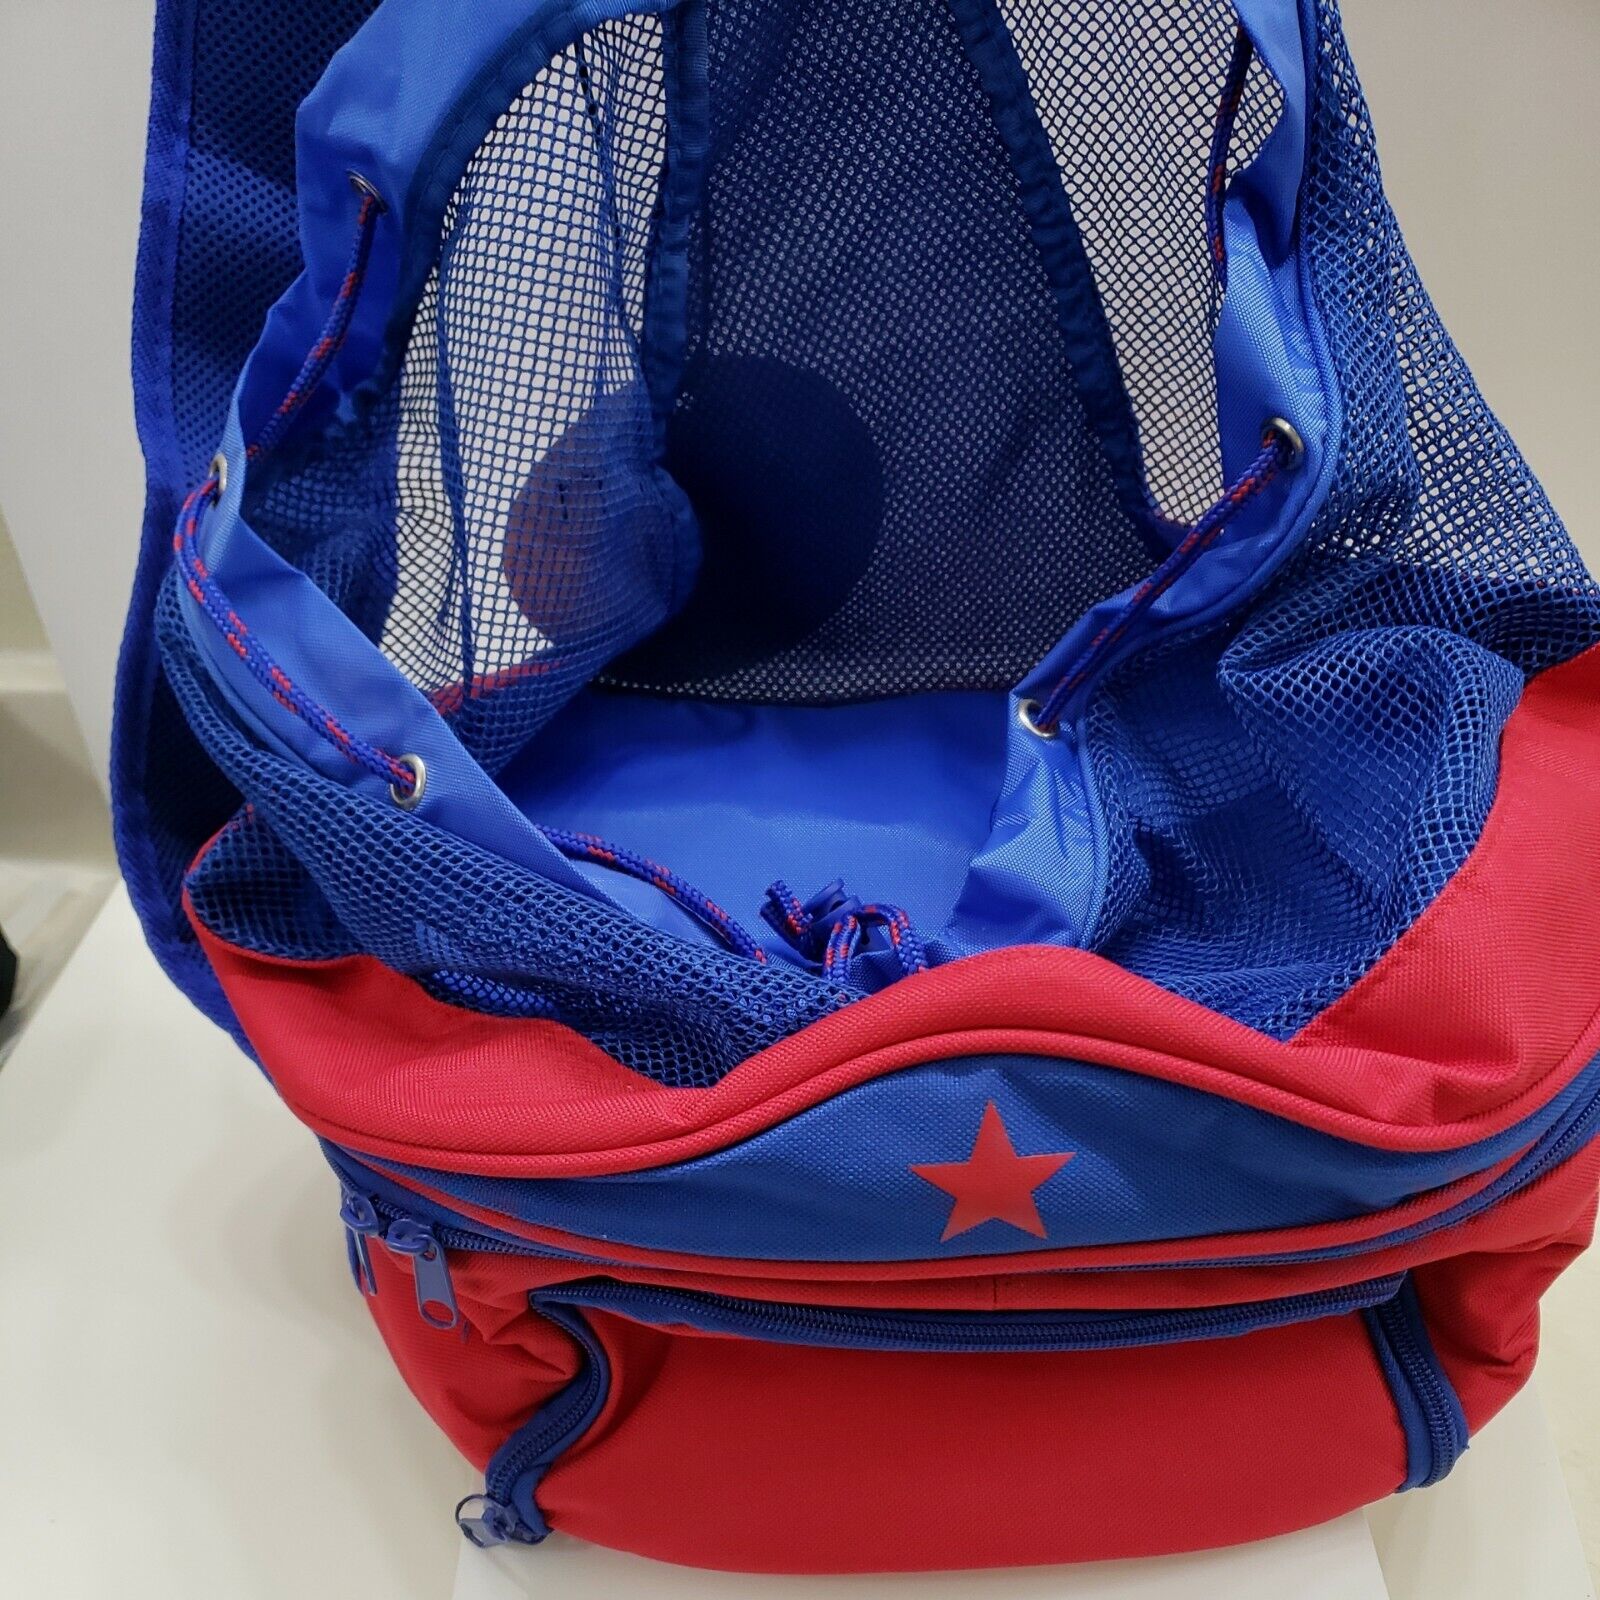 Macy's Cool Excellence Pack Ultimate Summer Red Cheap mail order specialty store Sling Blue bag Backpack Coo